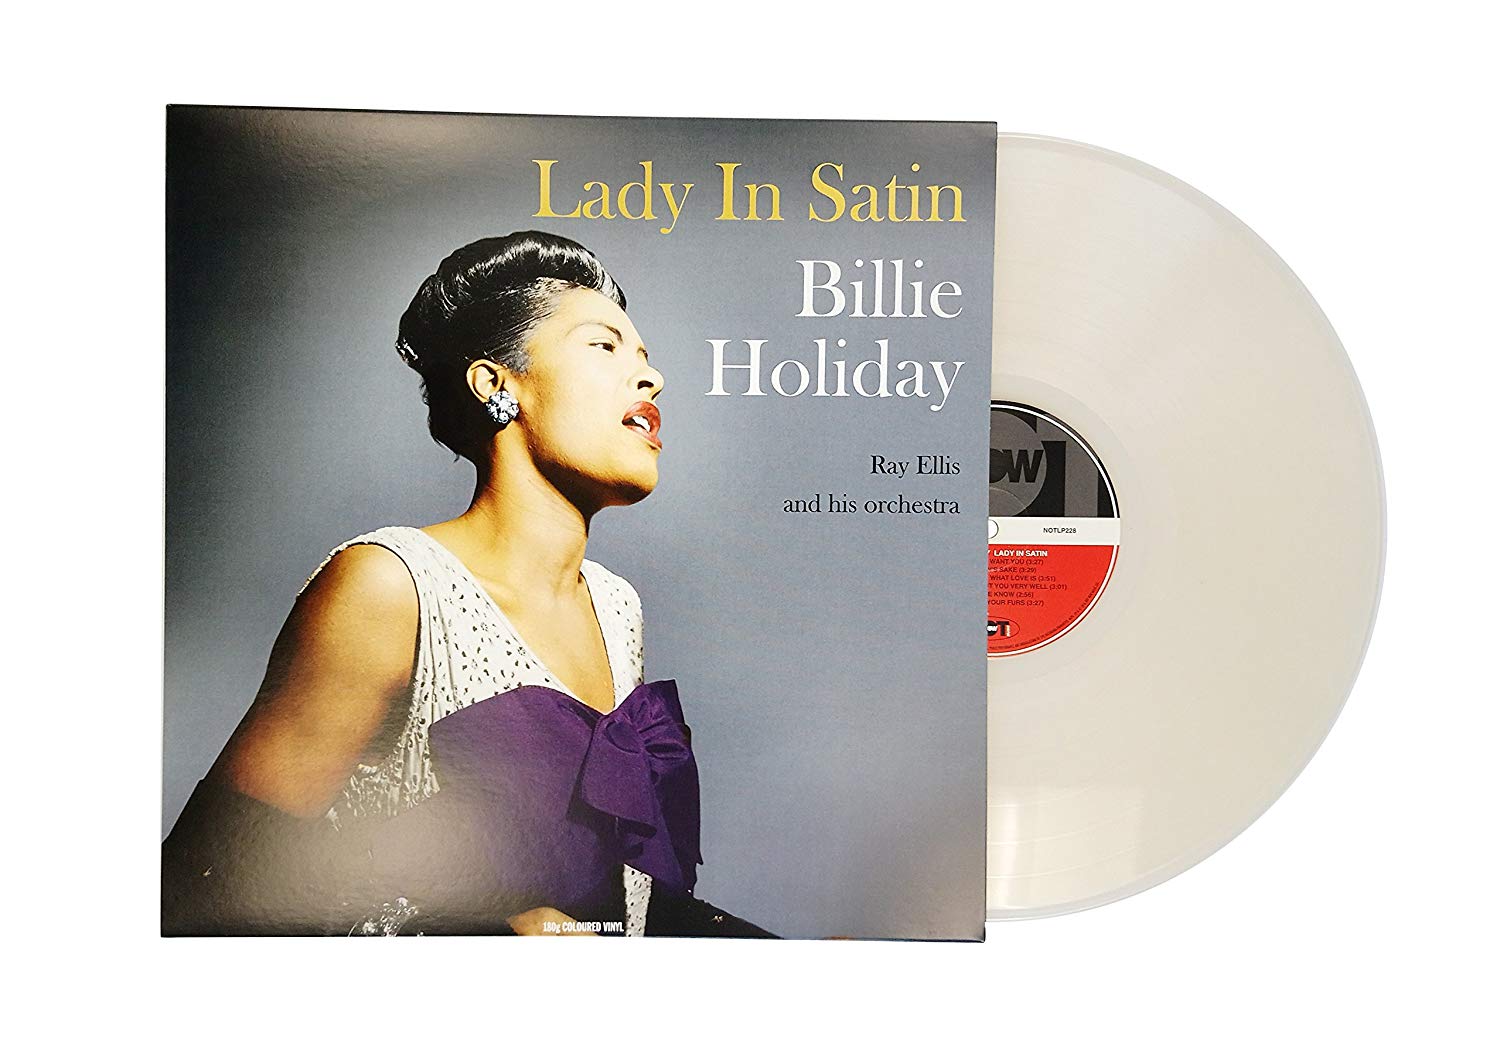 billie holiday reverb lp lady in satin 3rd issue